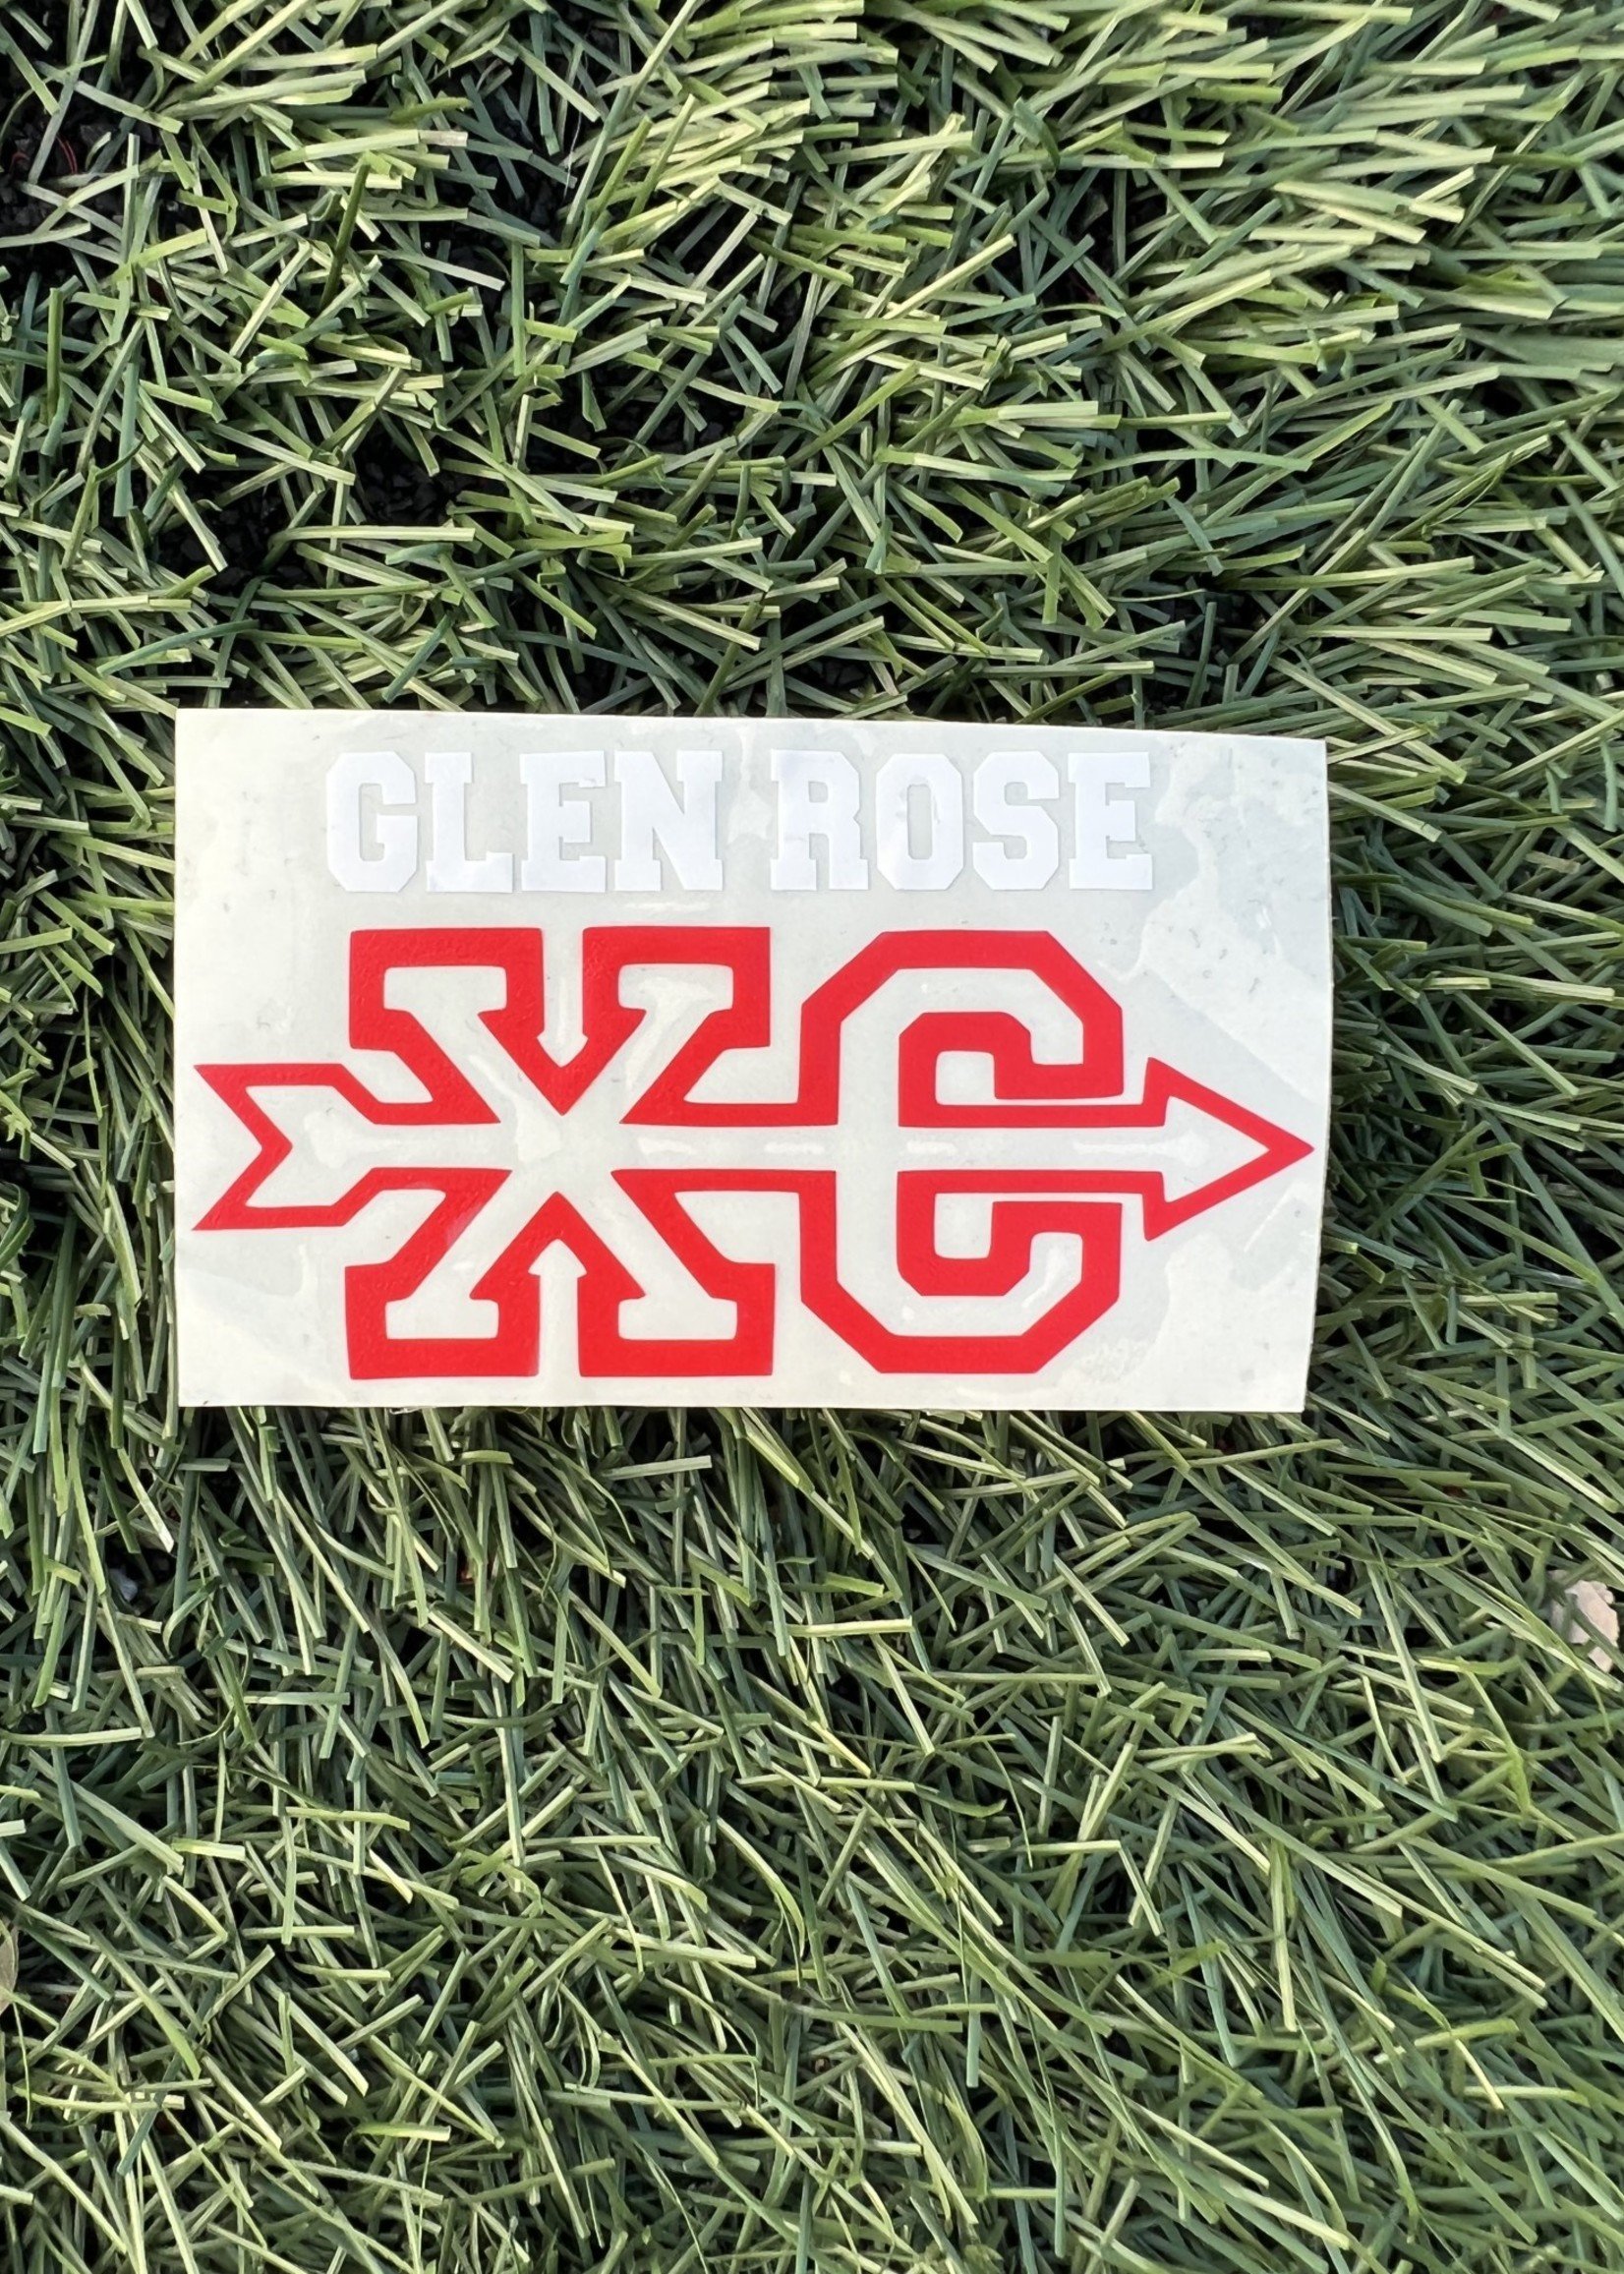 Cross Country Decal